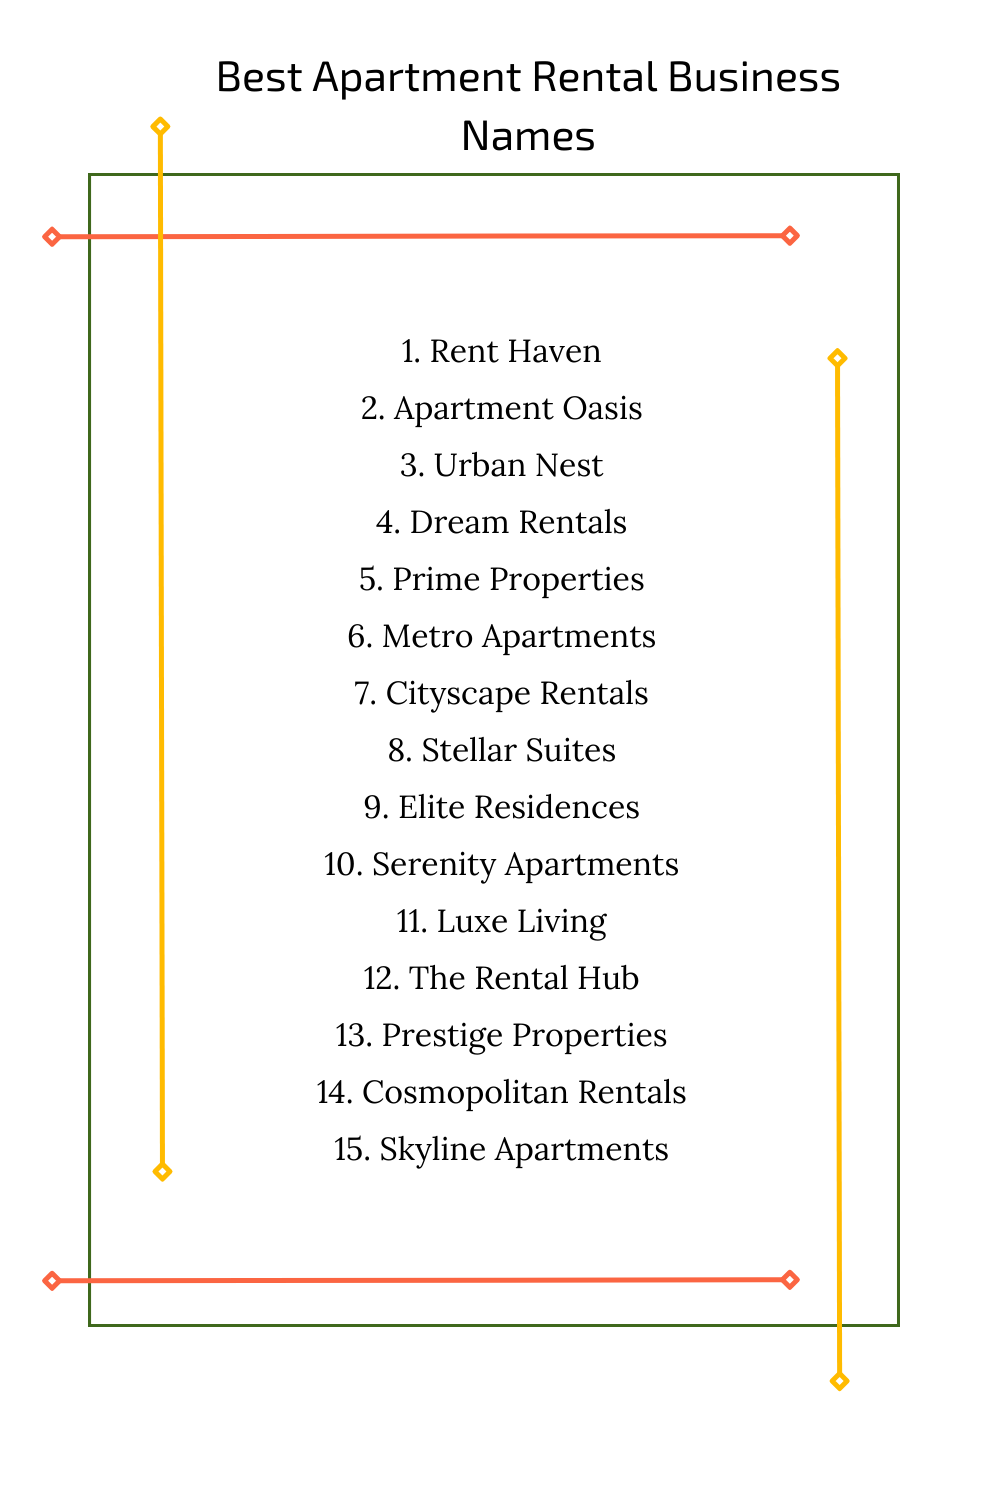 Best Apartment Rental Business Names